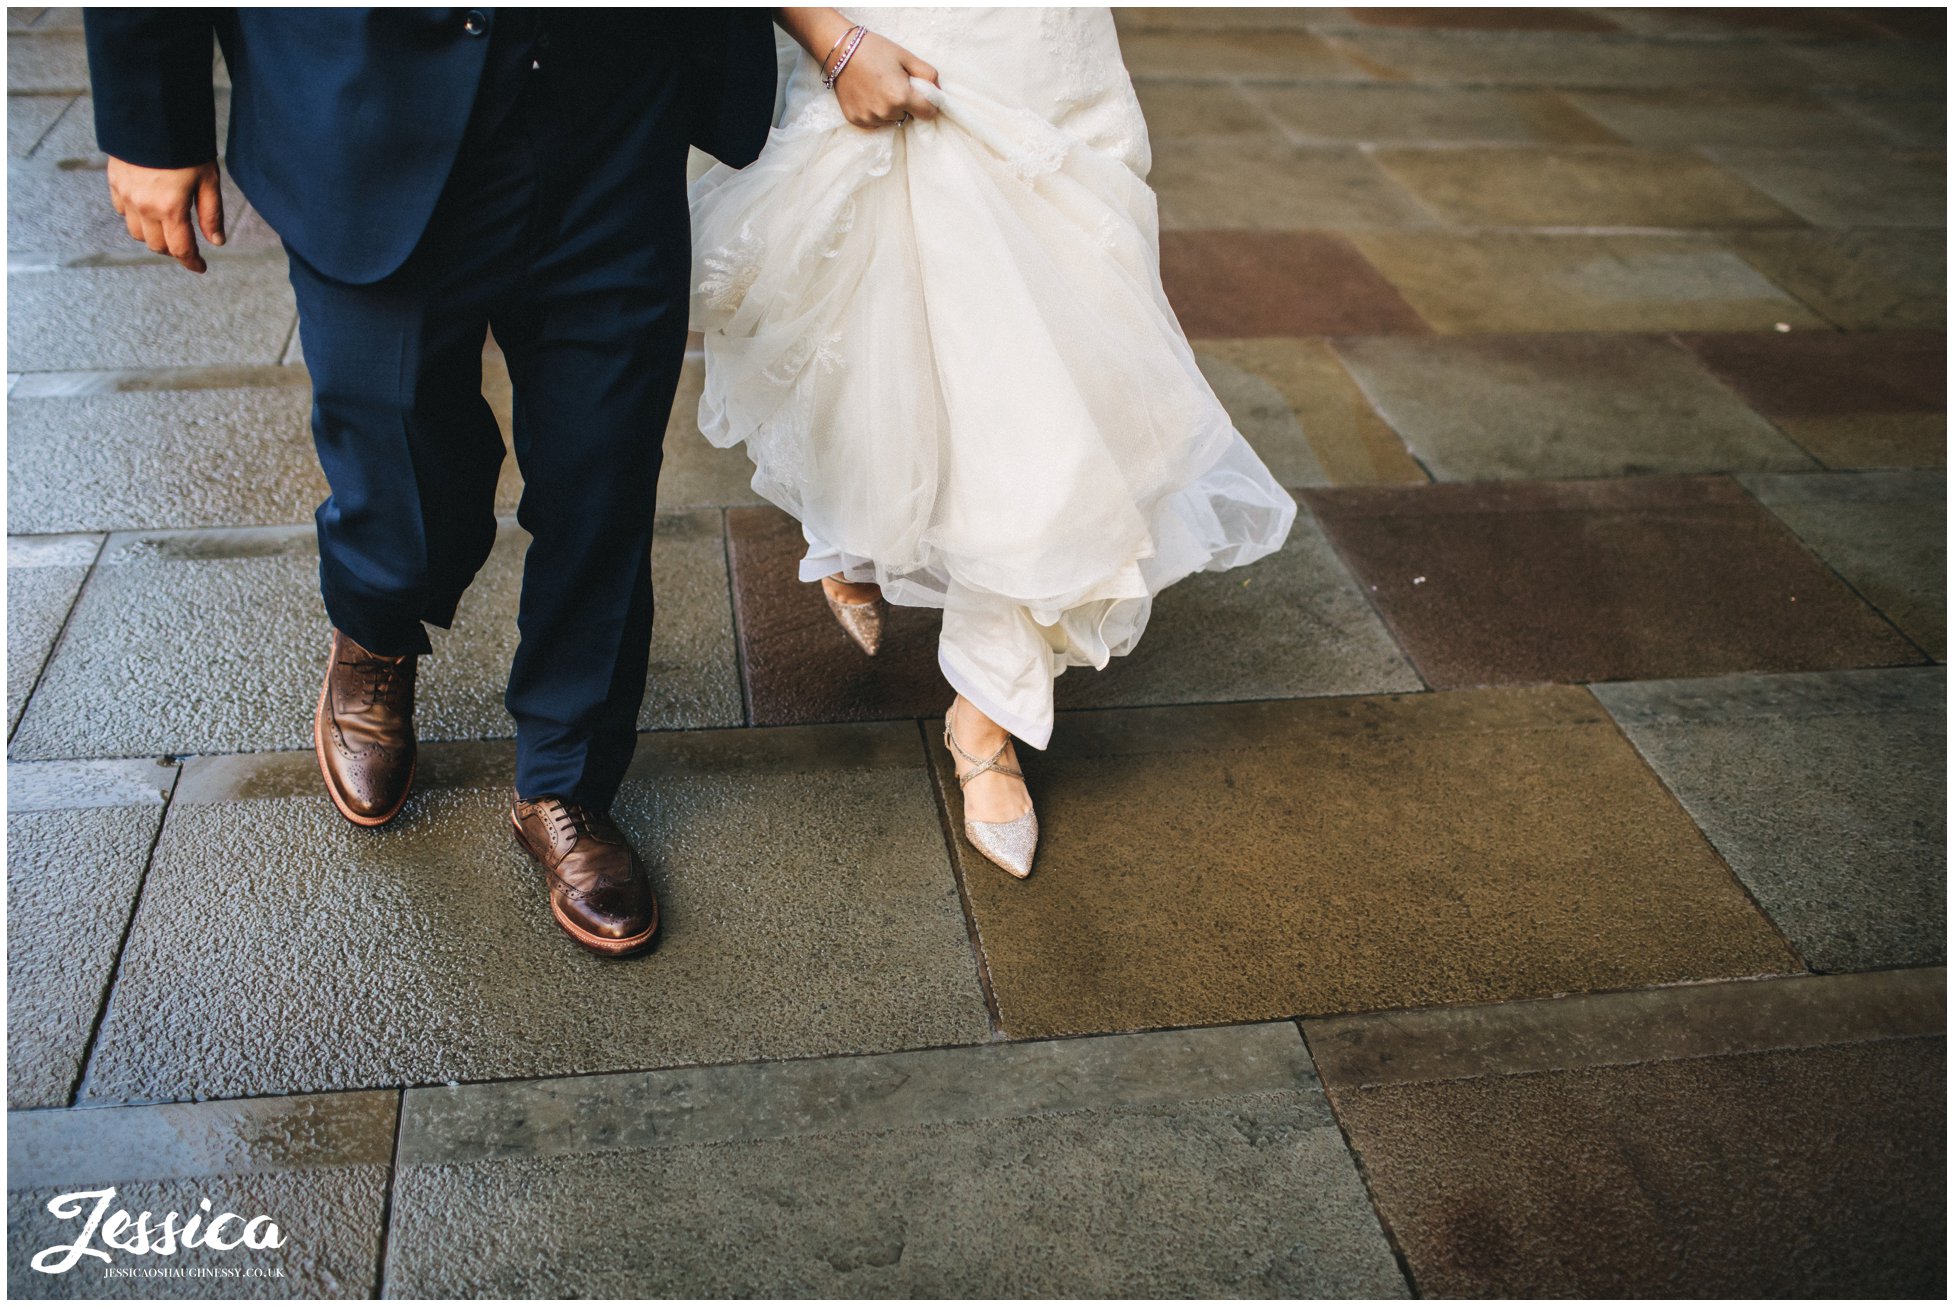 detail shot of newly wed's feet walking through a rainy manchester